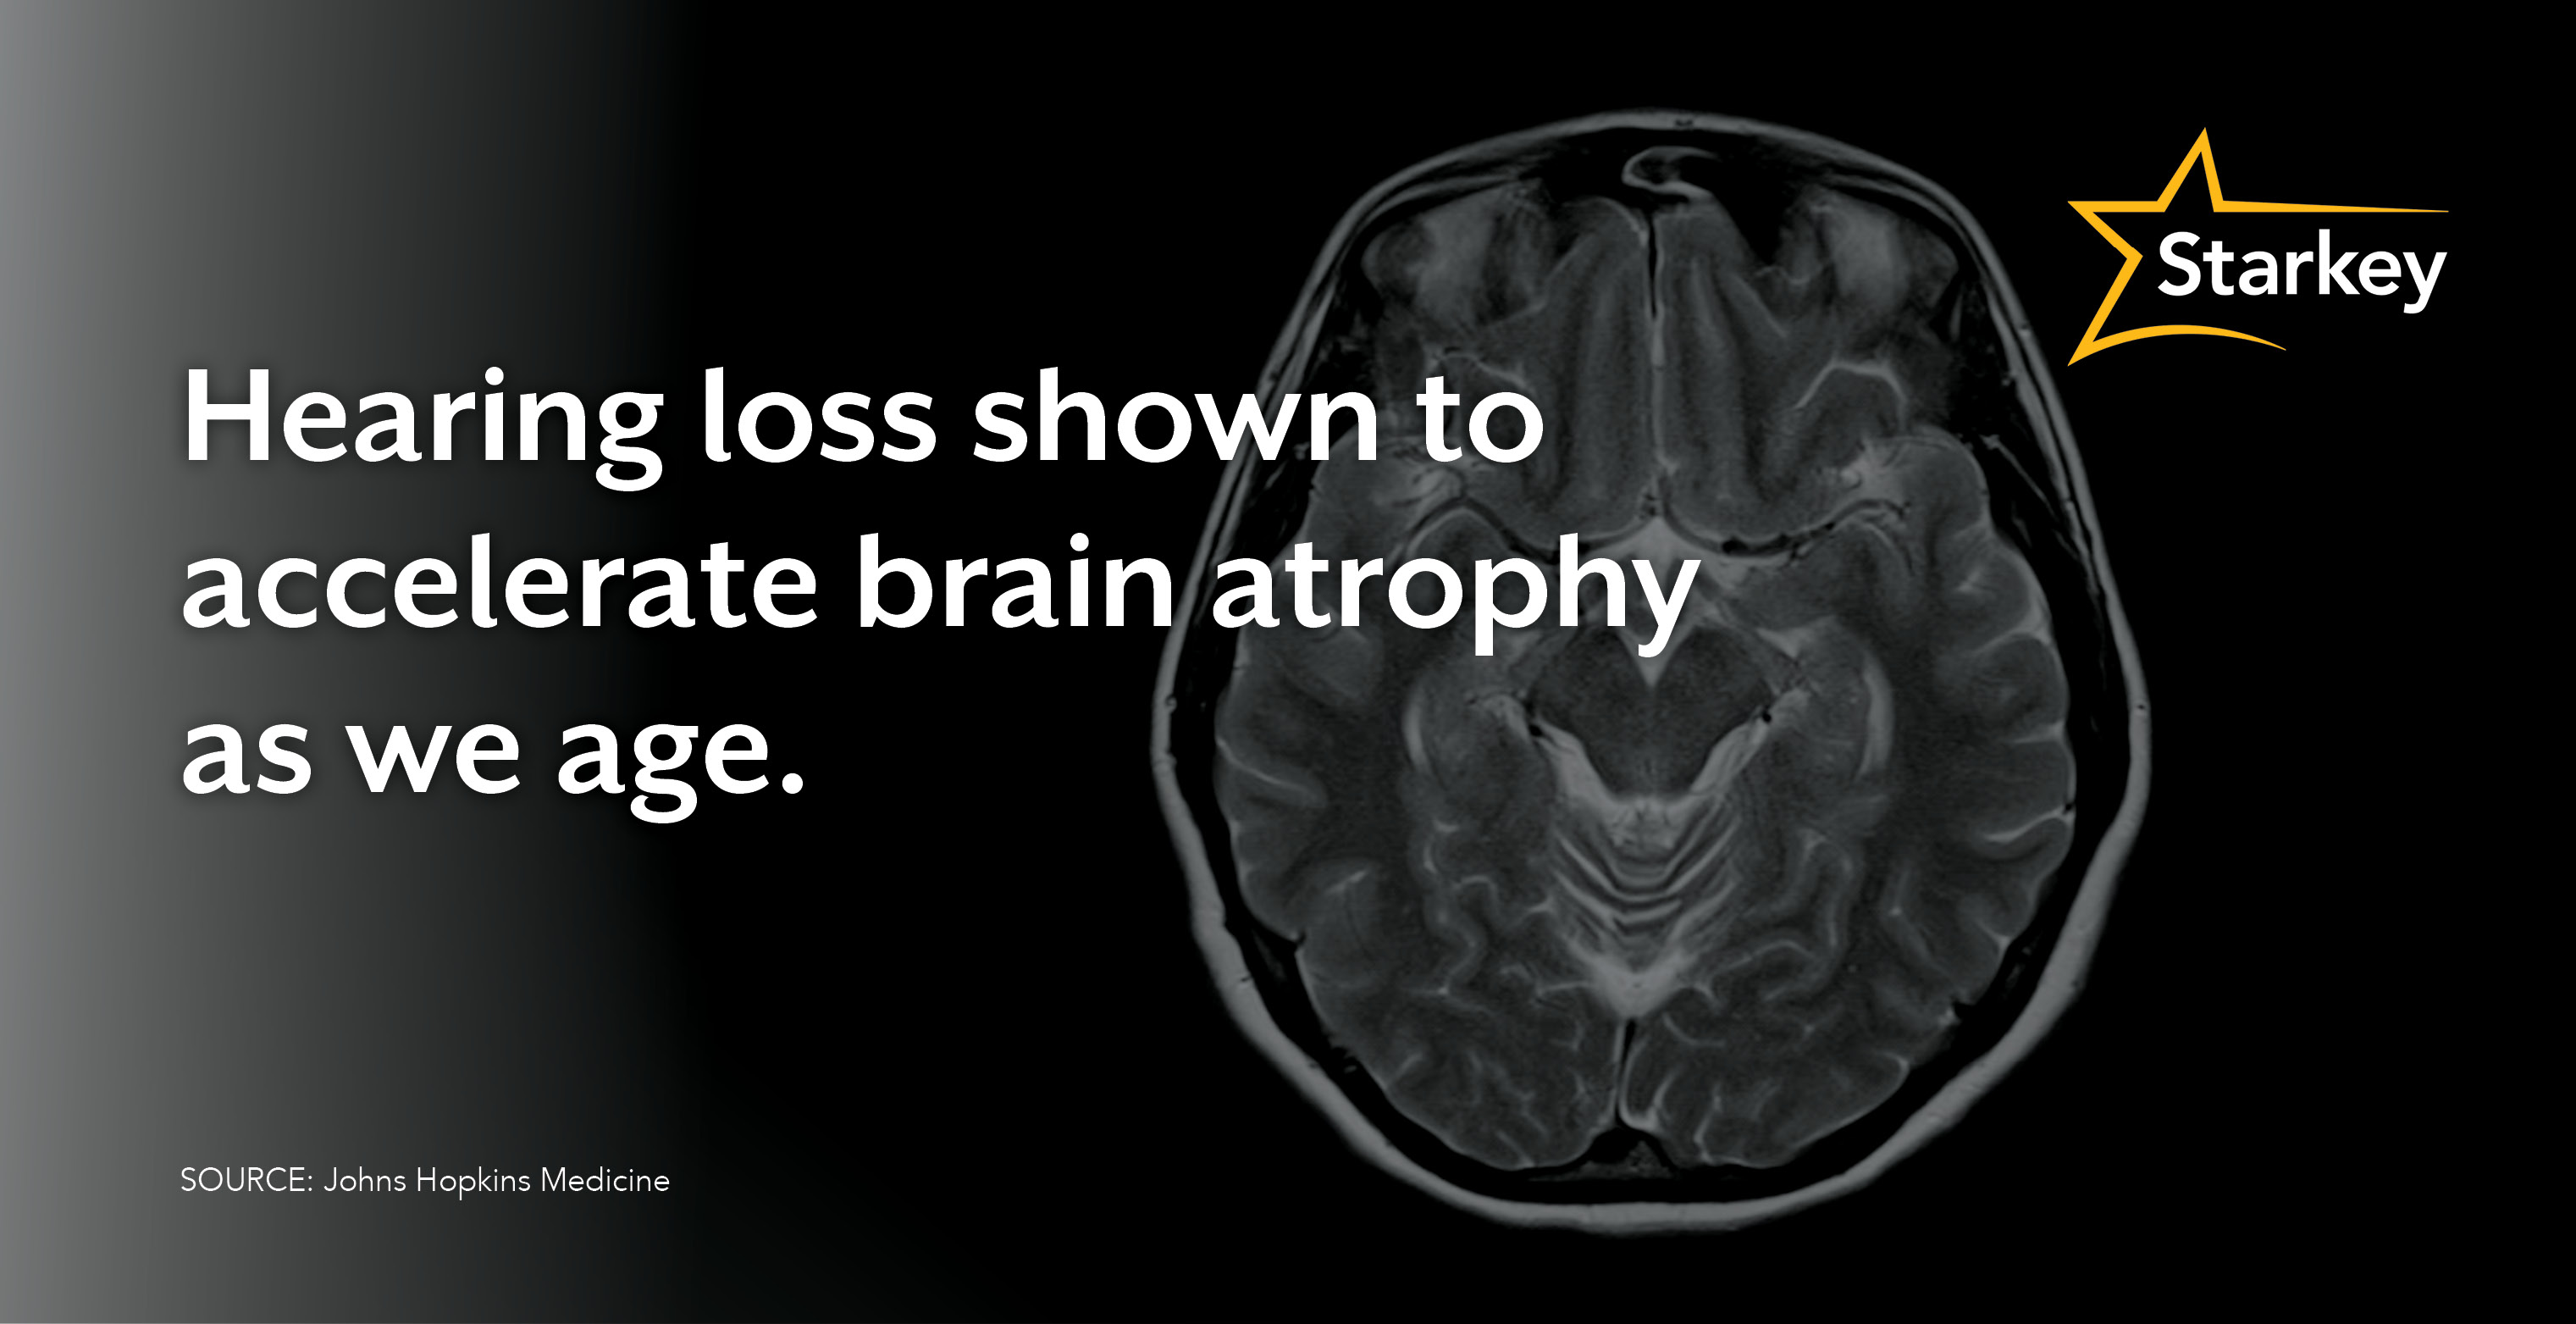 Image of brain next to quote that reads "Hearing loss shown to accelerate brain atrophy as we age."